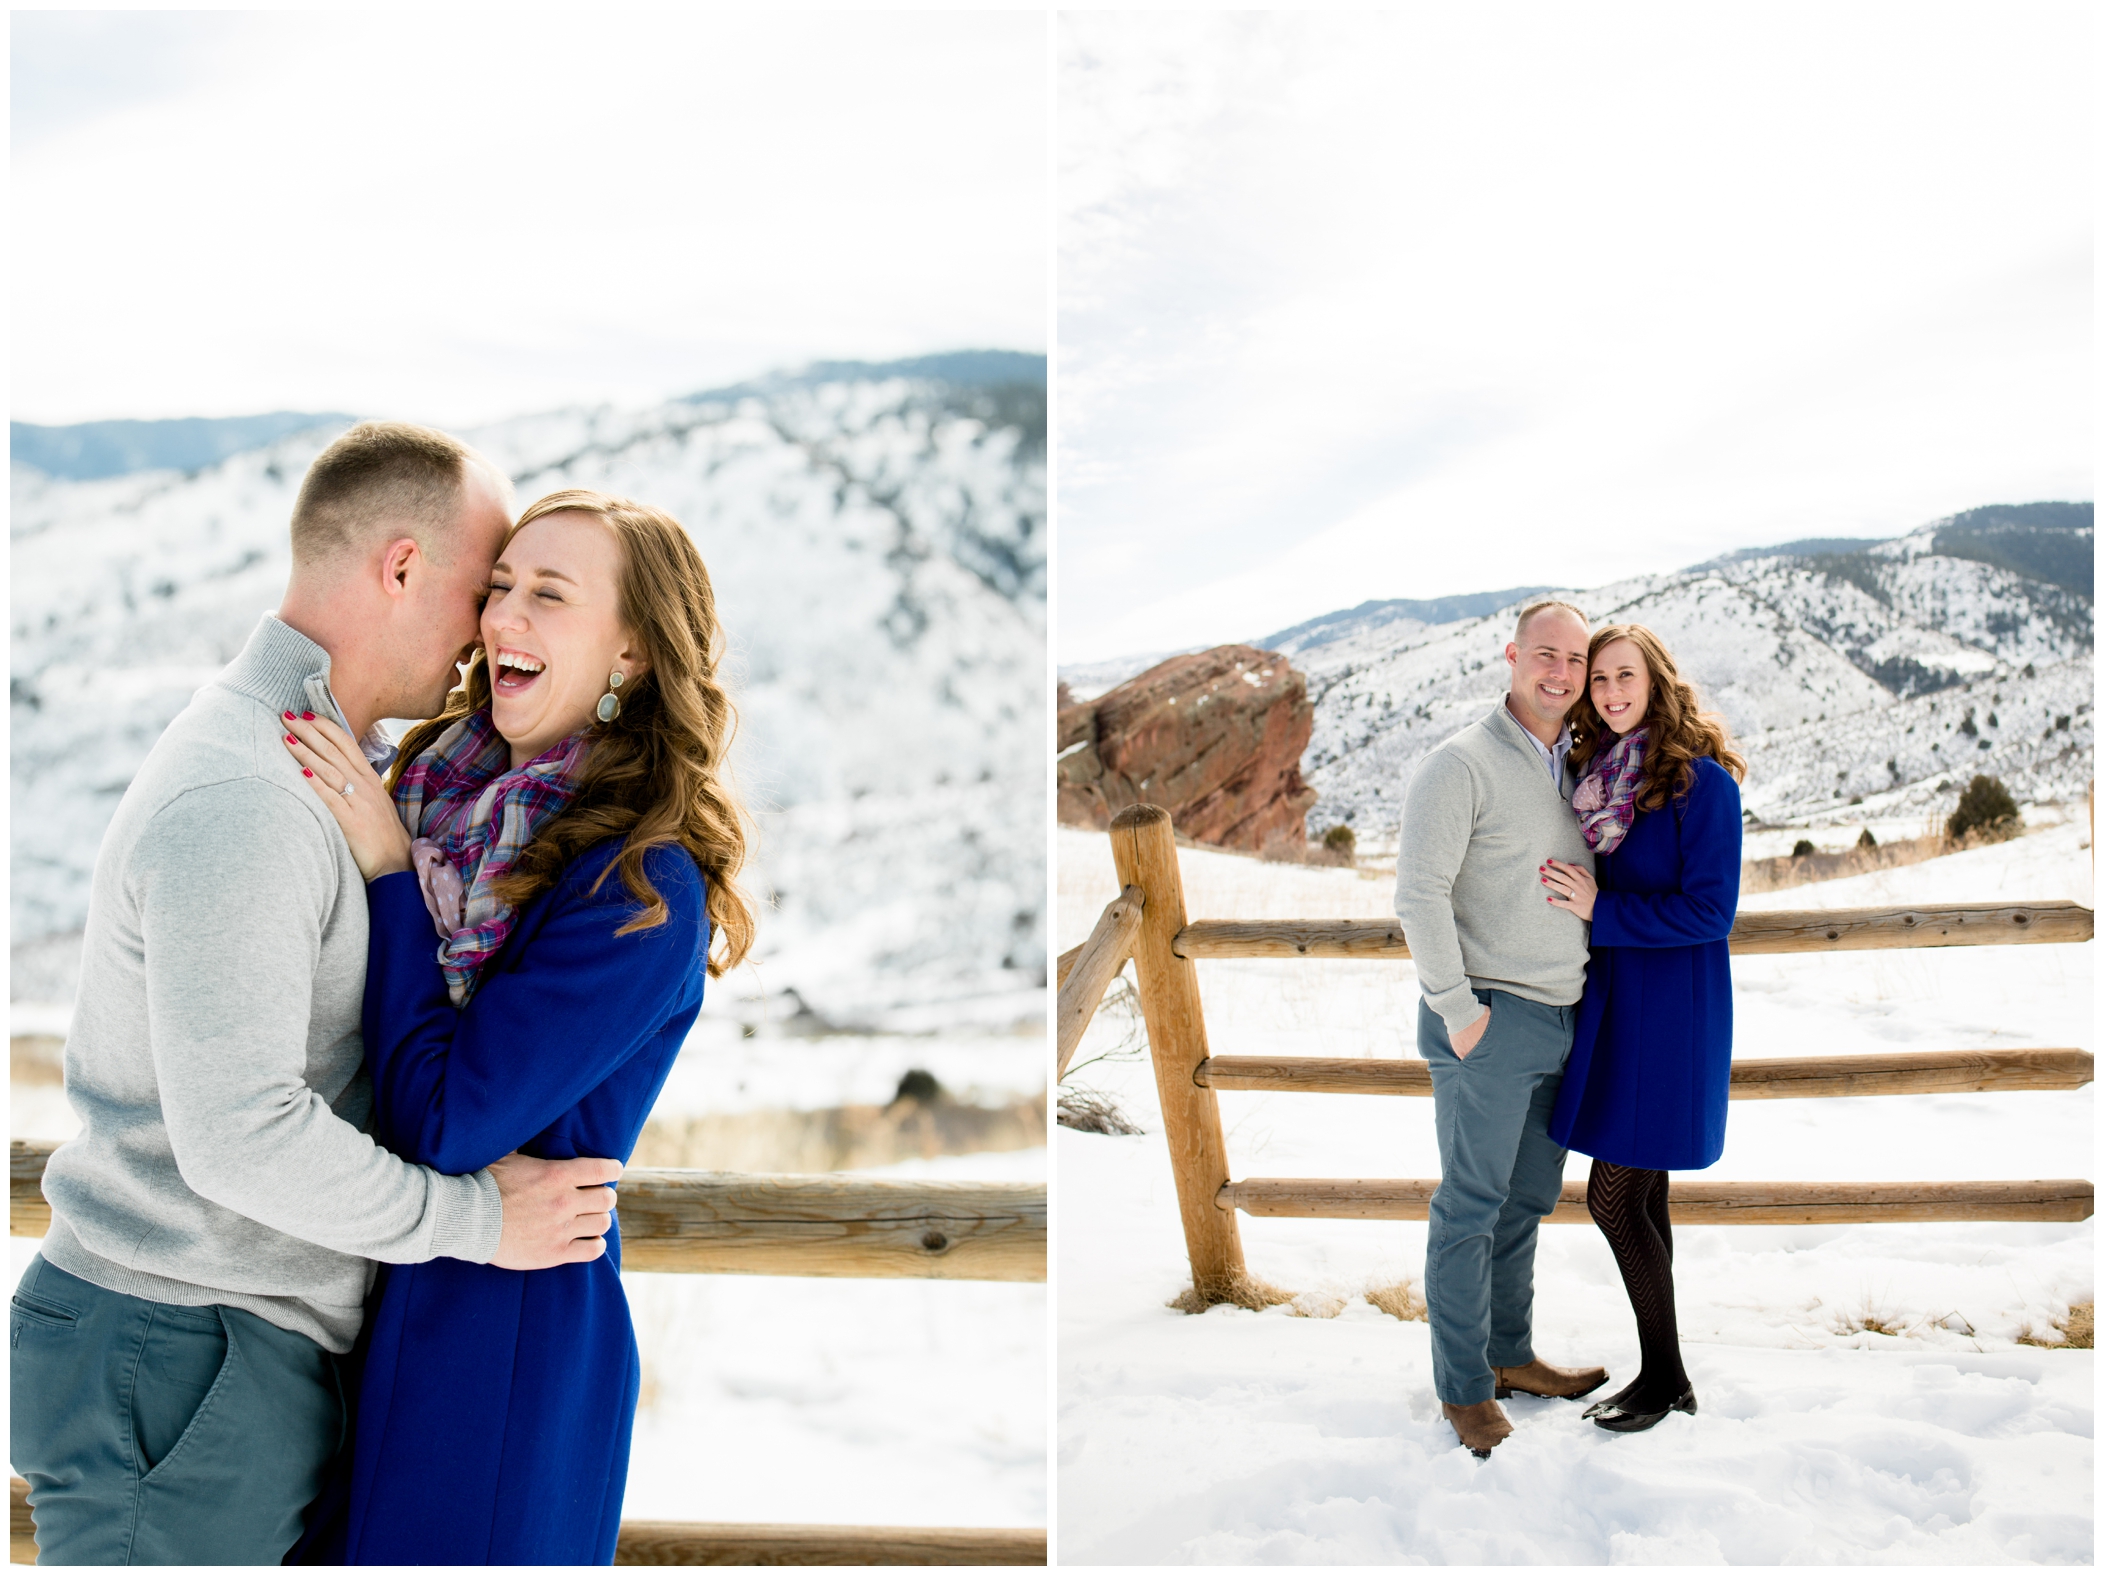 Denver engagement photography at Red Rocks by Plum Pretty Photography